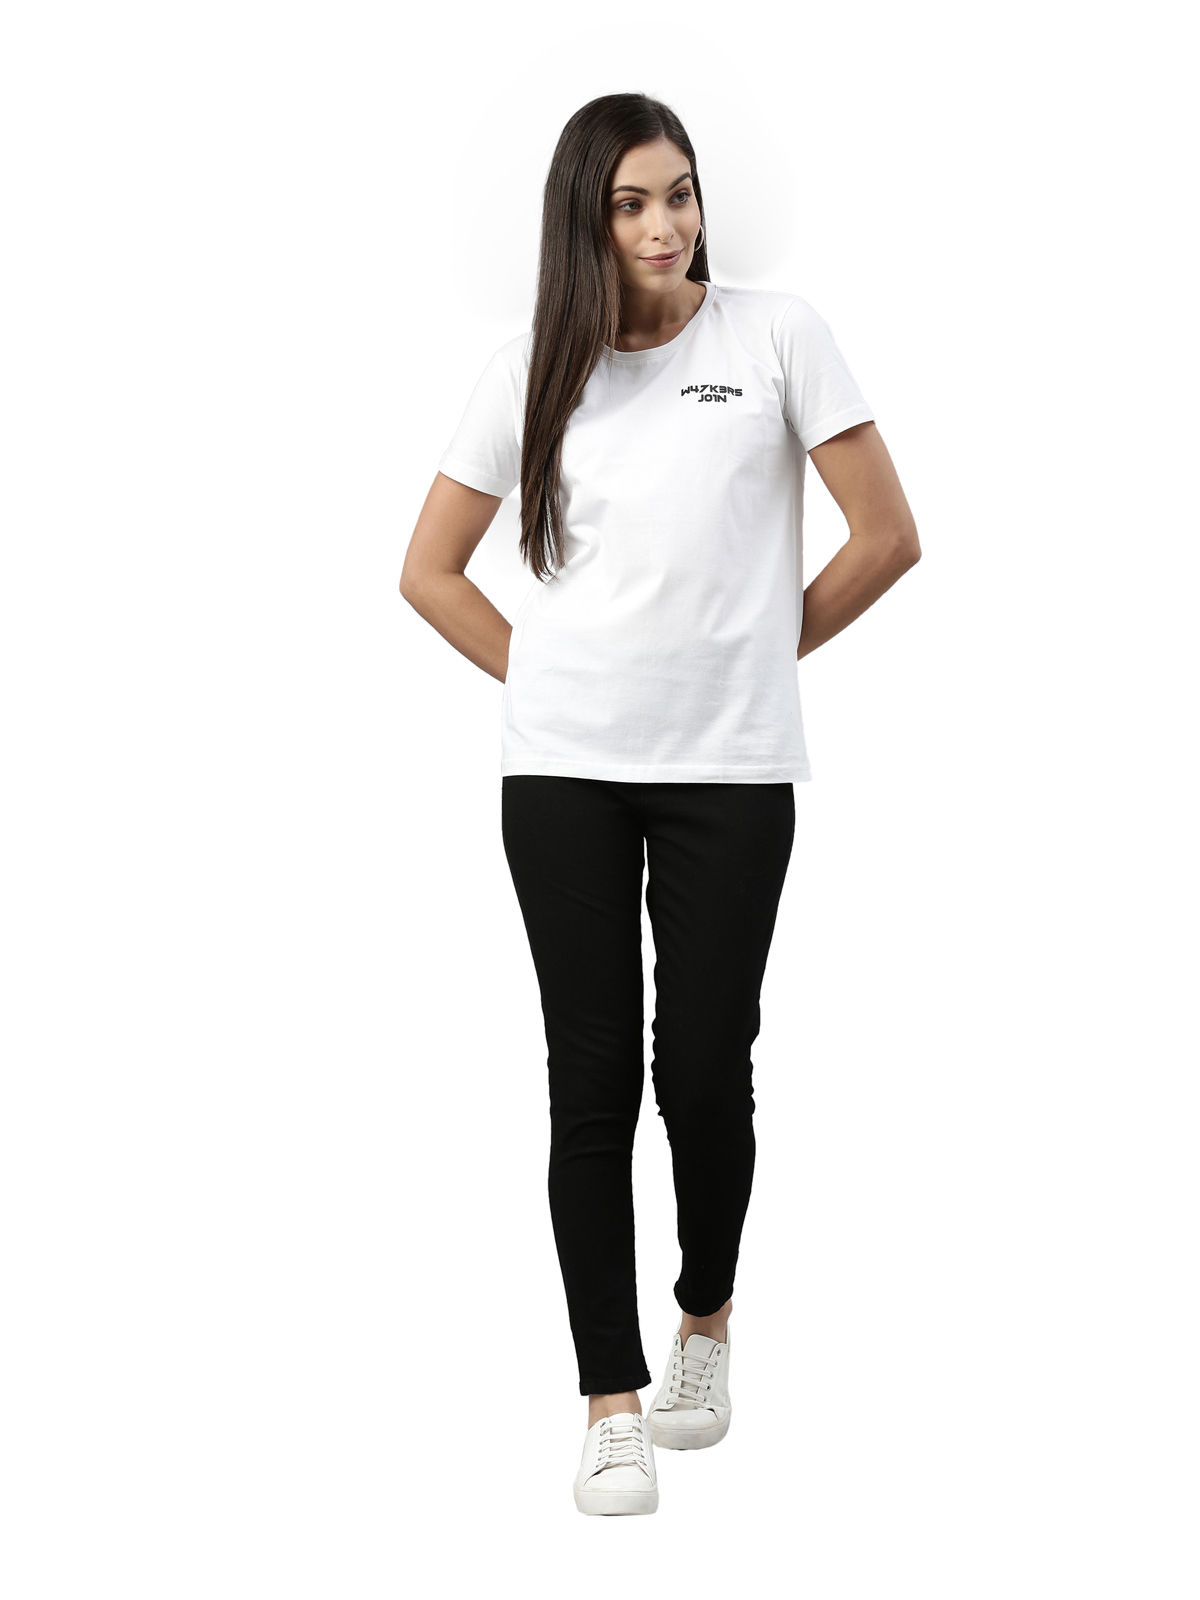 Women's T shirts - Buy Tshirts Online for Women in India – Westside